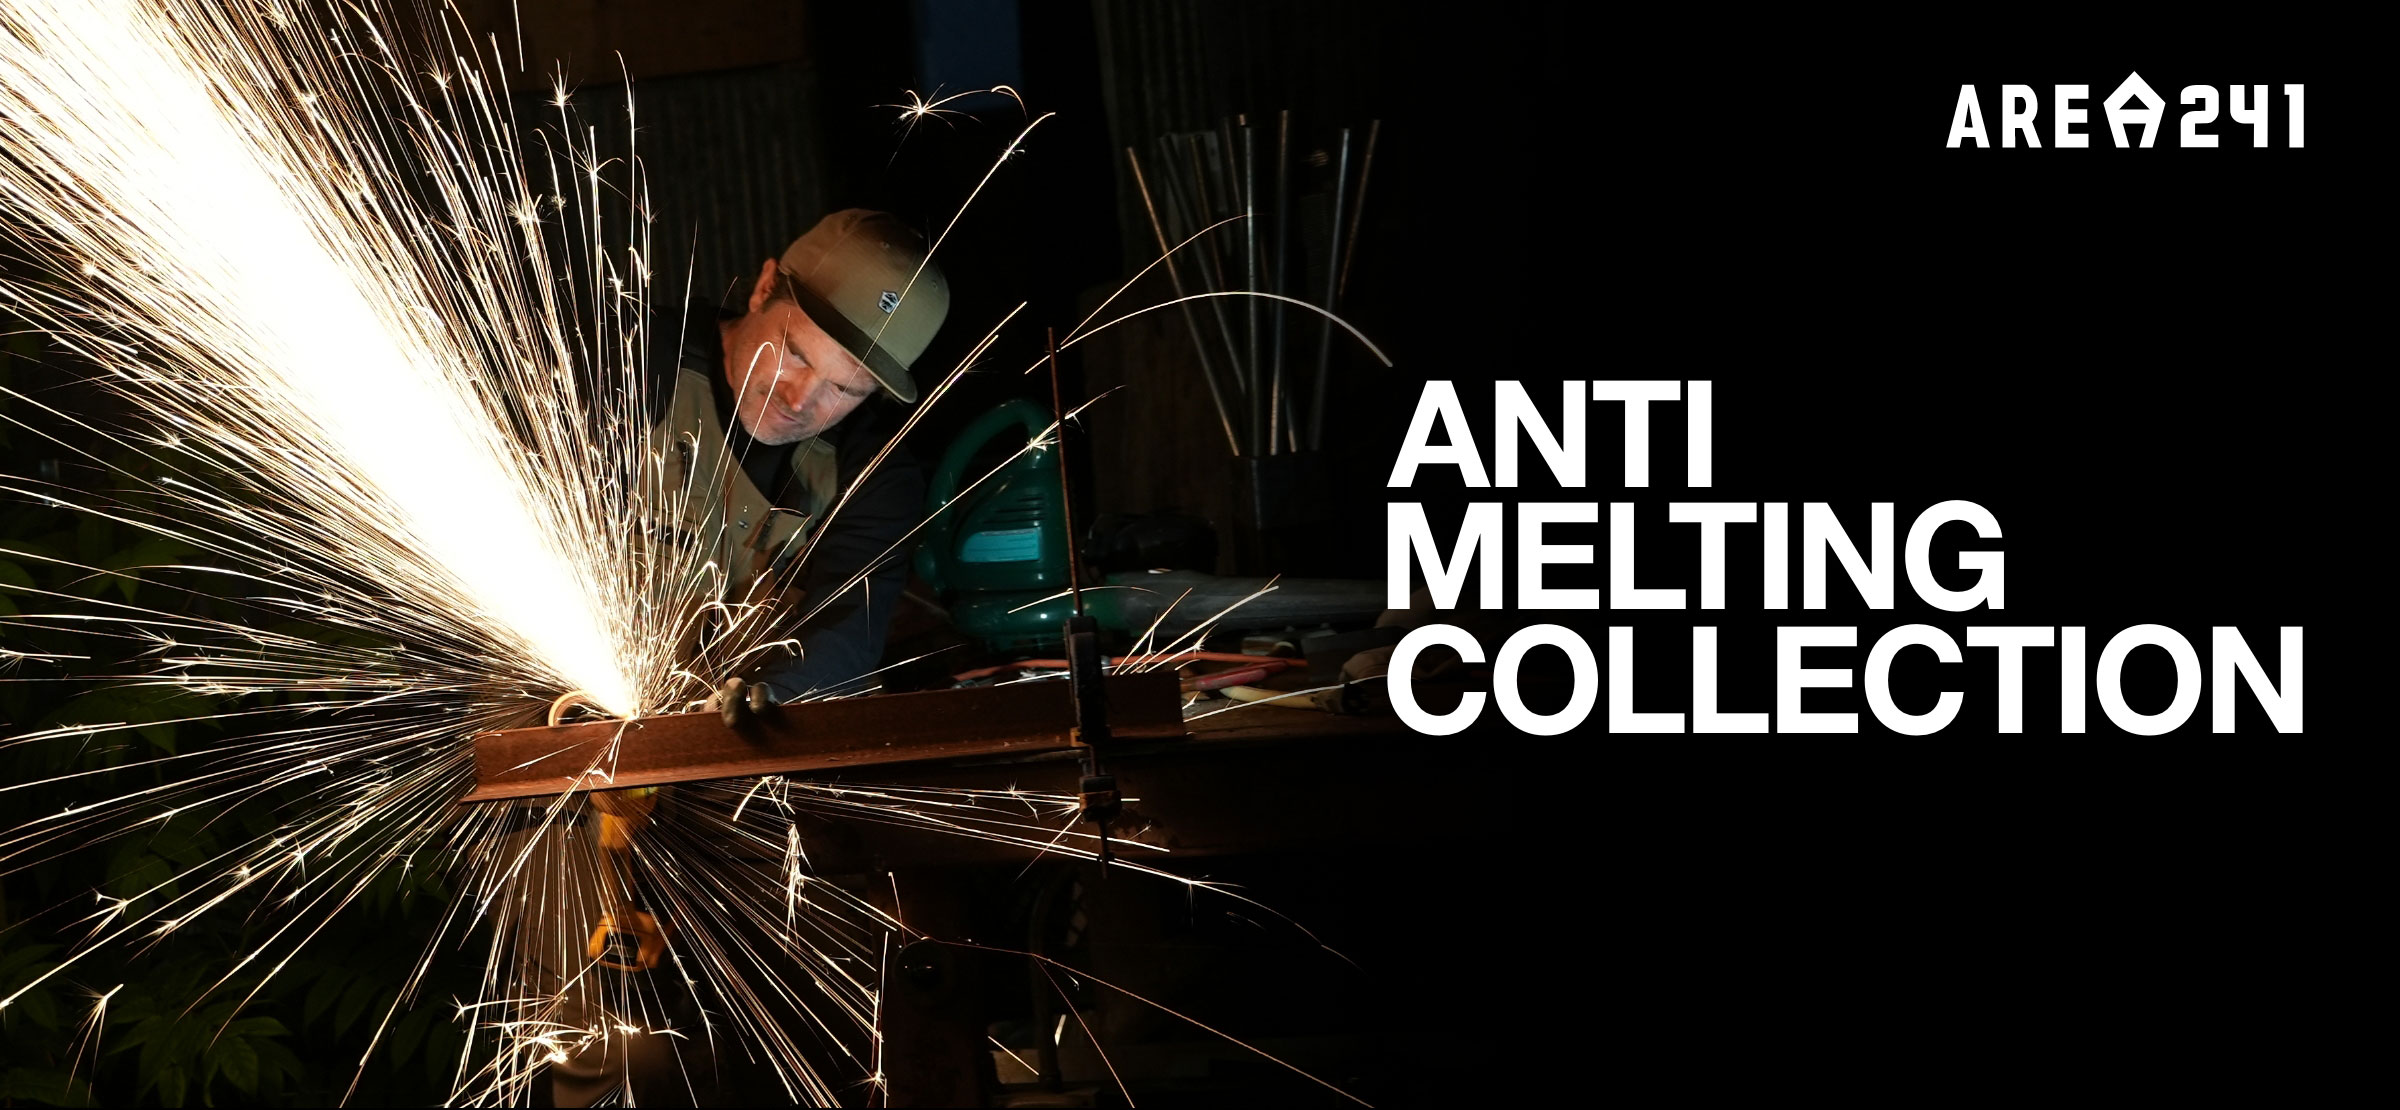 ANITI MELTING COLLECTION